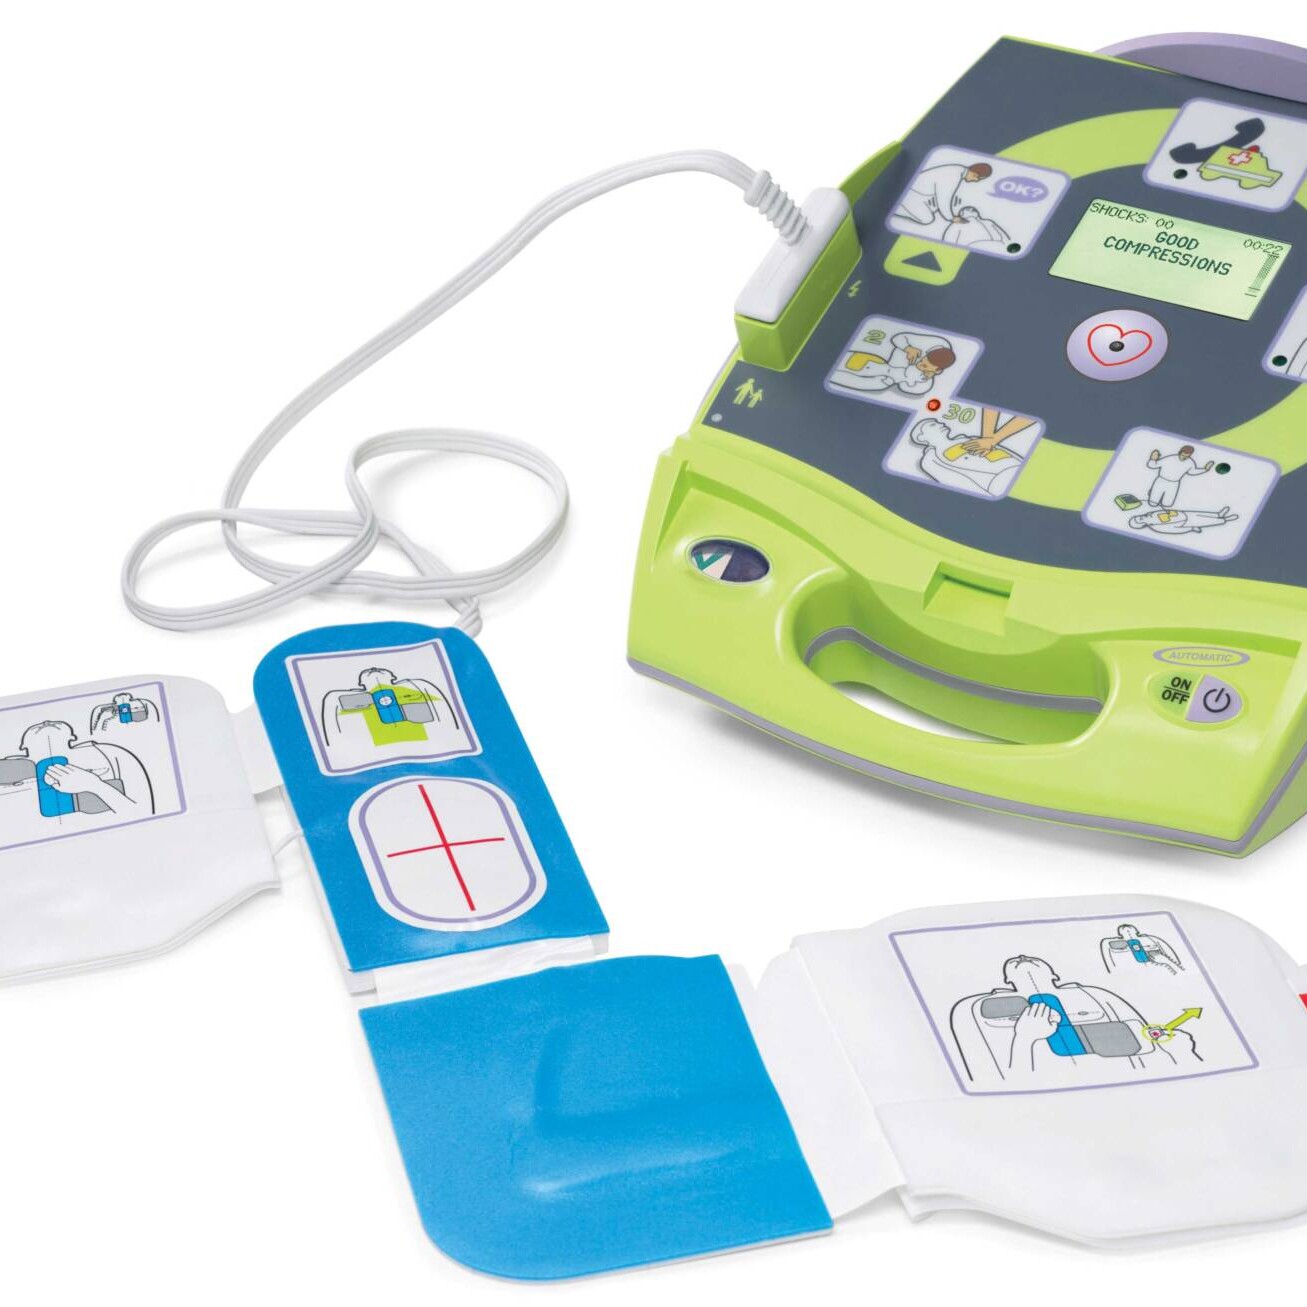 Zoll AED Plus AED - Fully Automatic